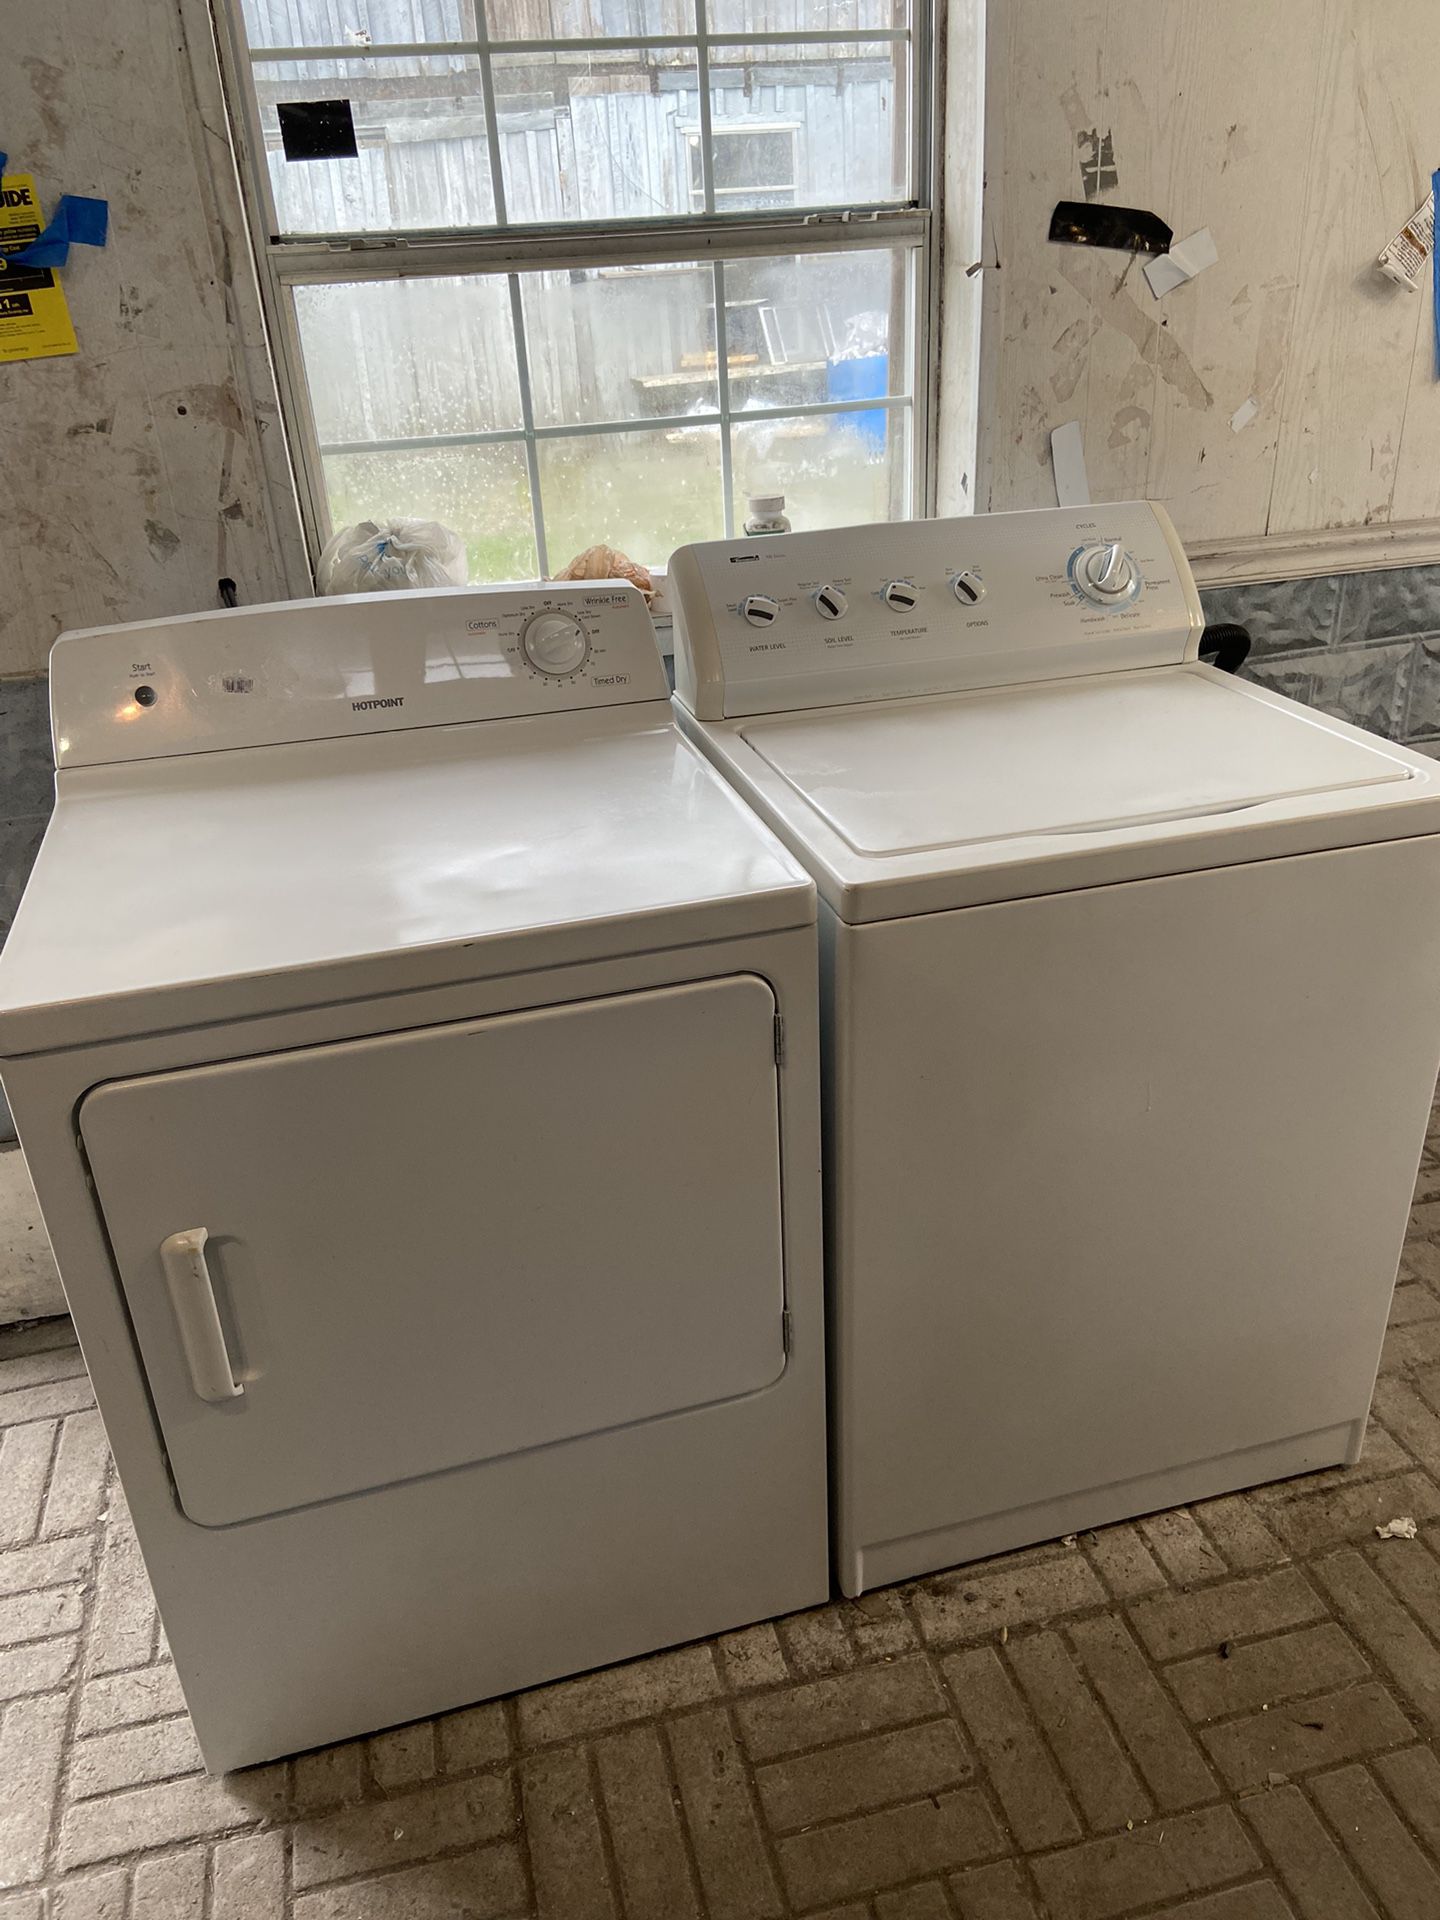 KENMORE SUPER LOAD PLUS WASHER & ELECTRIC DRYER! THEY RUN  LIKE BRAND NEW! NO ISSUES WITH EITHER. ILL RUN BOTH THROUGH ALL CYCLES.Text (contact info r